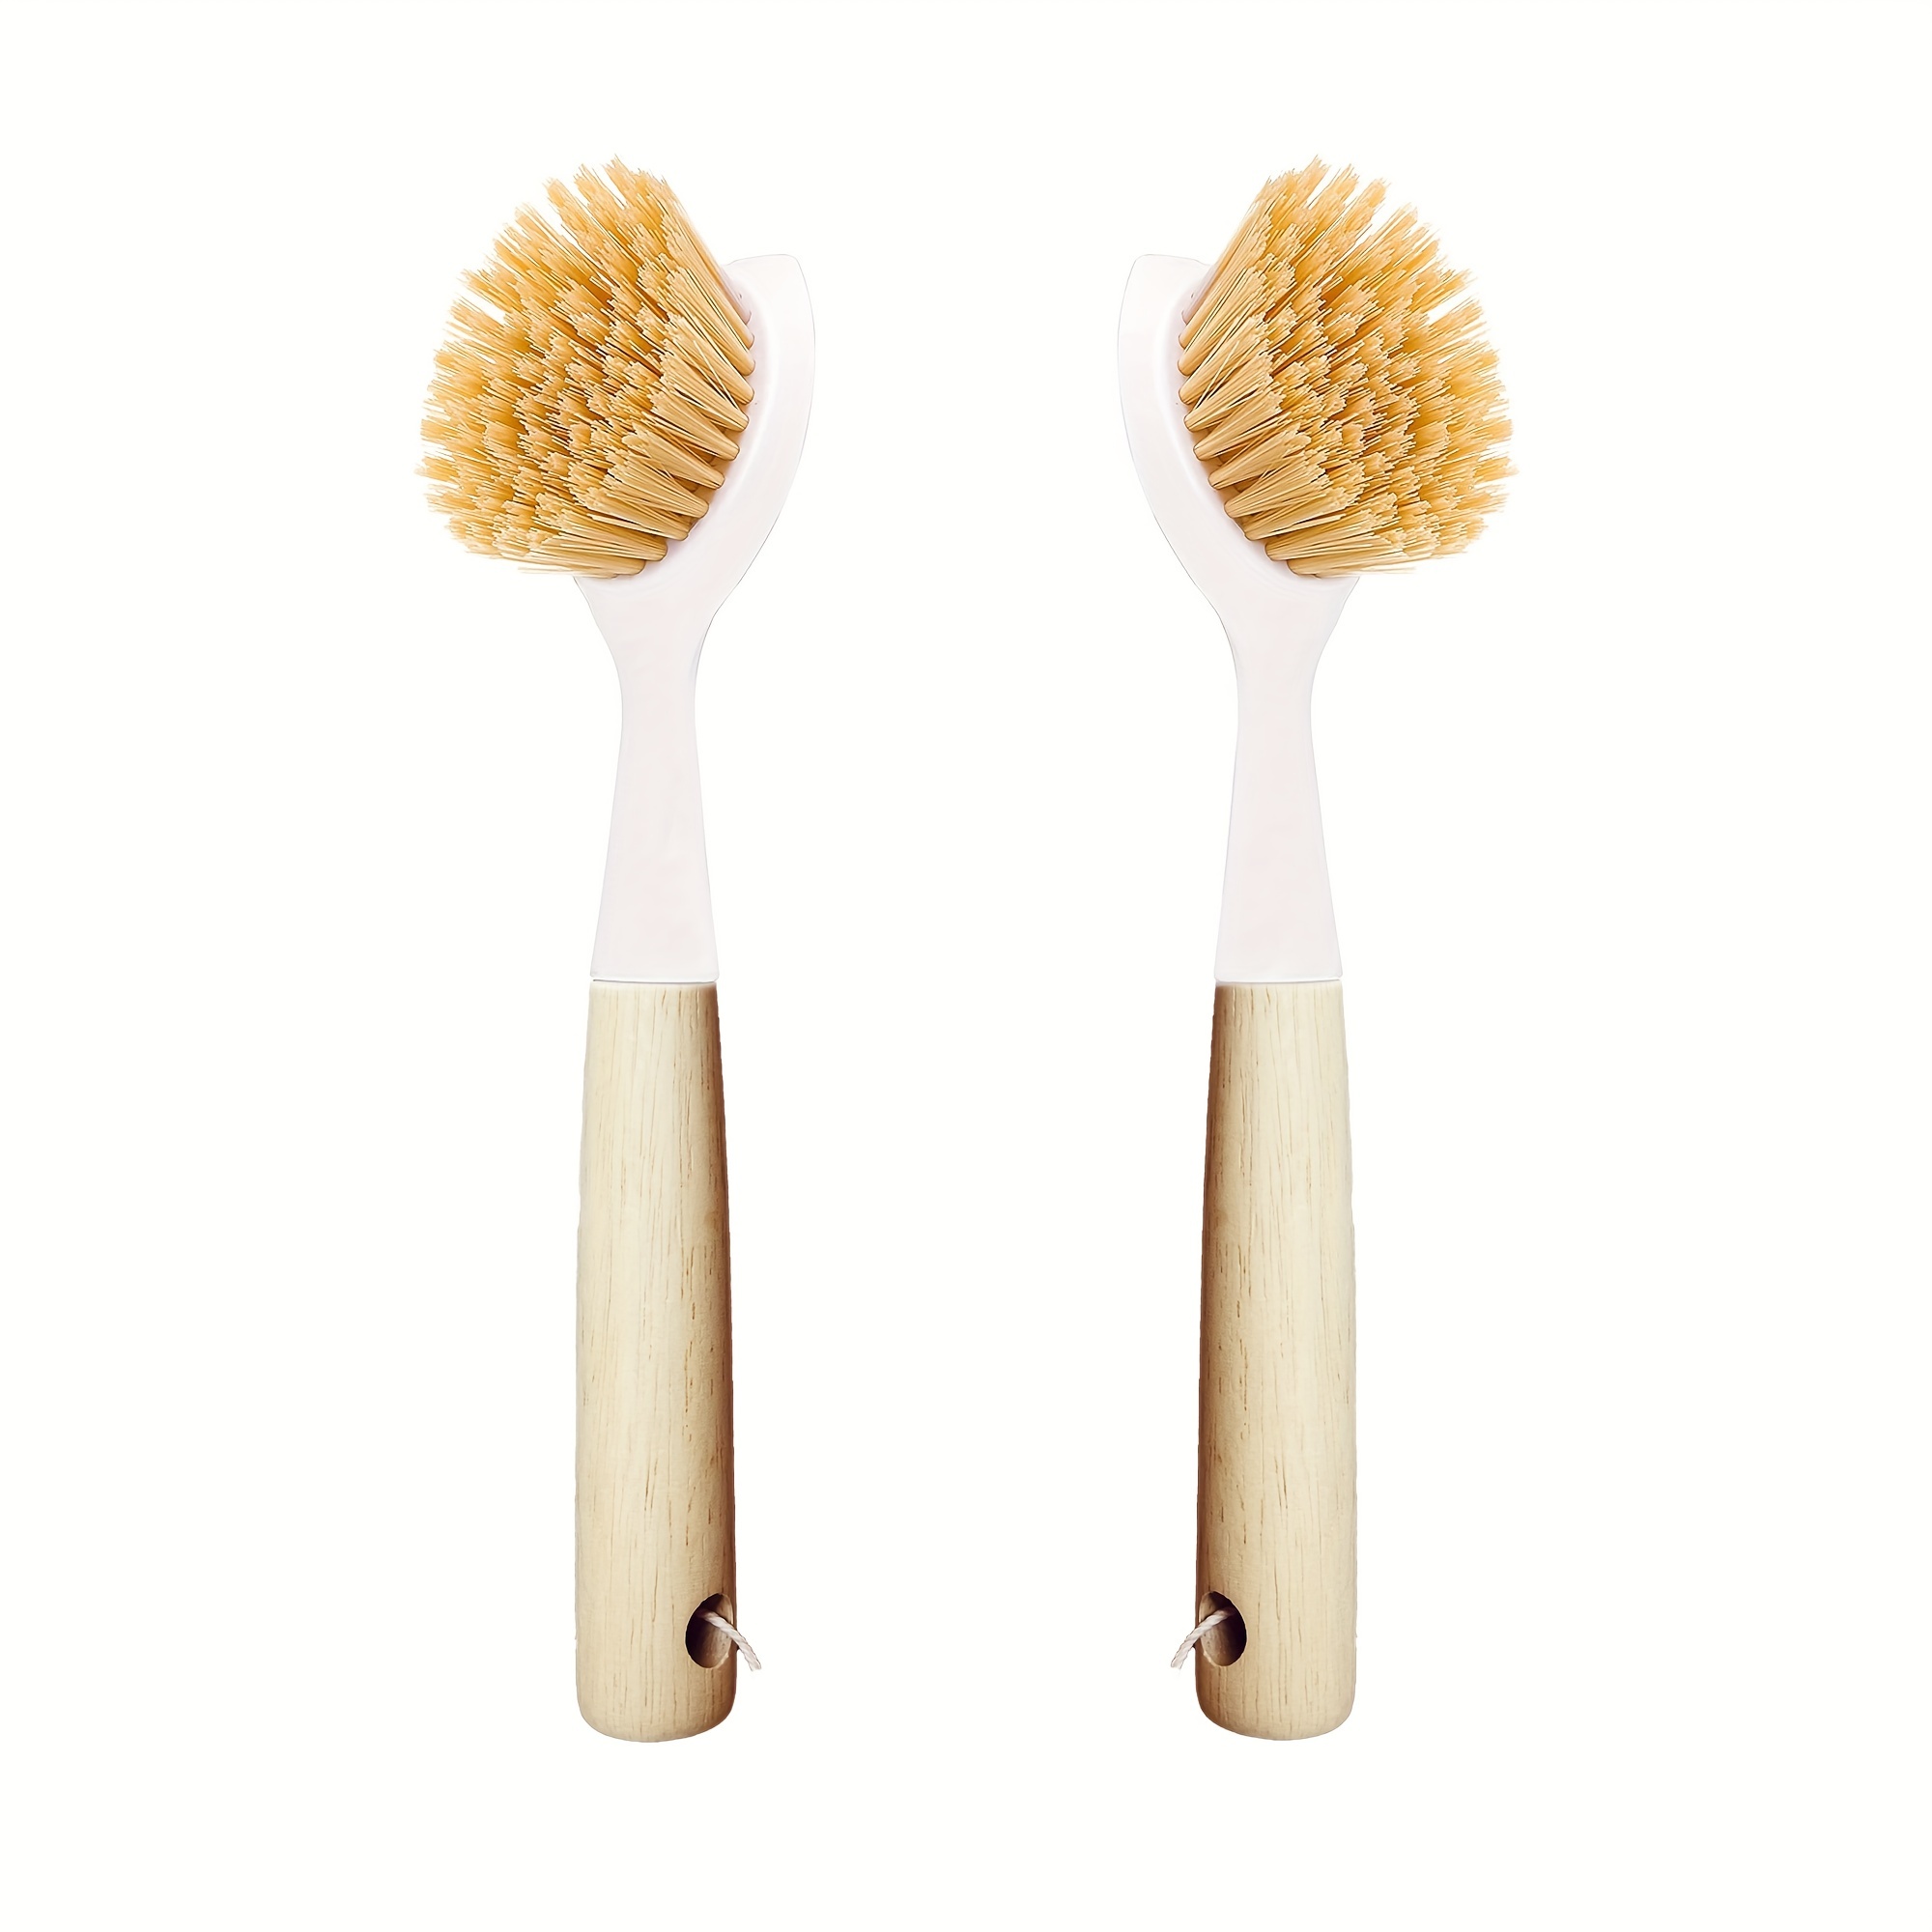 2 Pack Kitchen Dish Brush Bamboo Handle Dish Scrubber Built-in Scraper,  Scrub Brush for Pans, Pots, Kitchen Sink Cleaning, Dishwashing and Cleaning